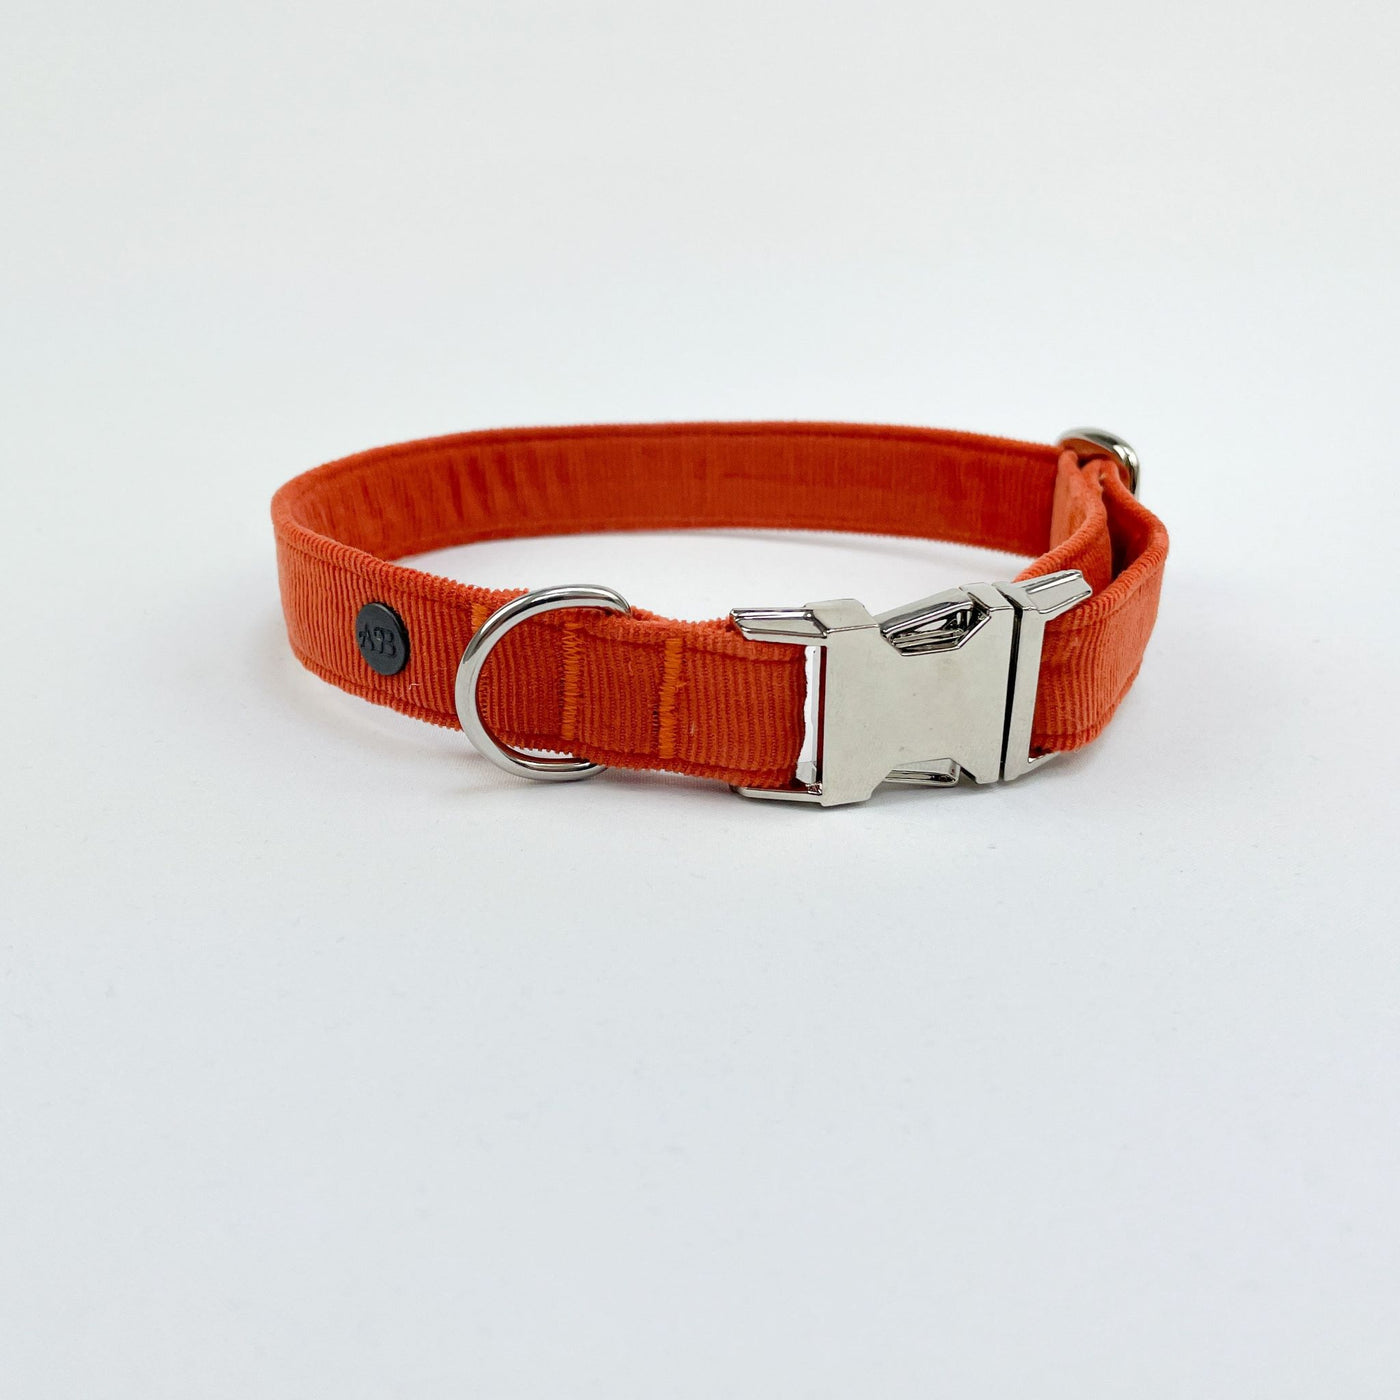 Orange Corduroy Dog Collar with chrome buckle and fittings.